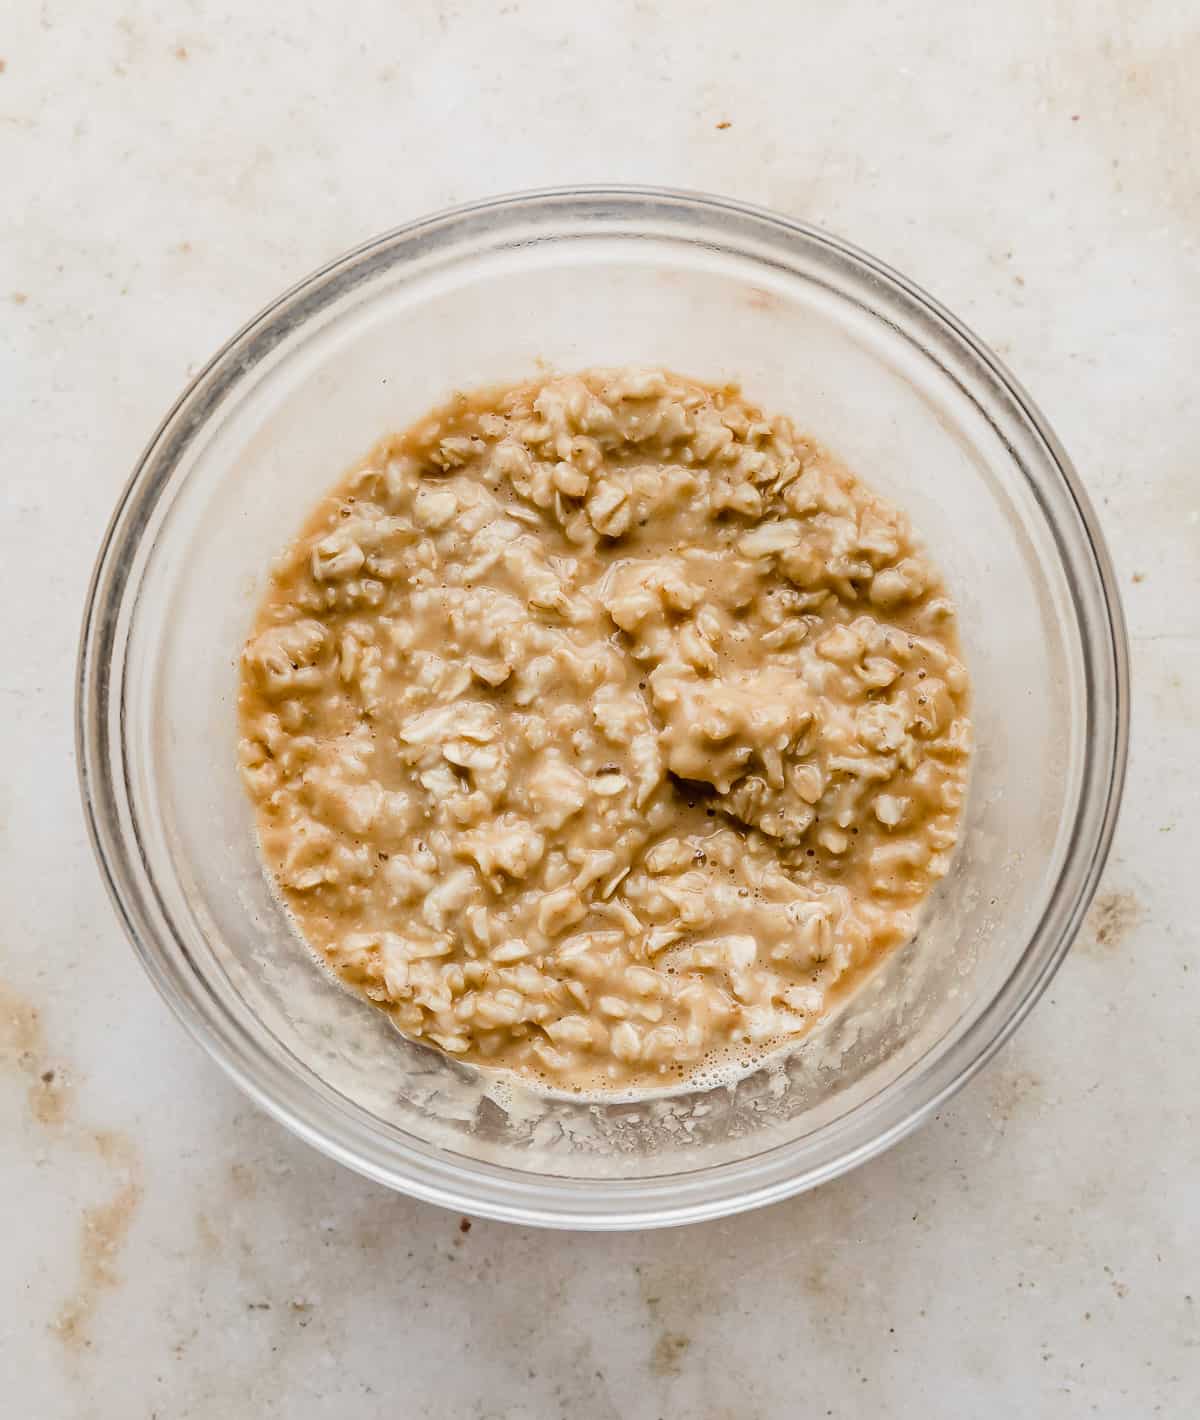 A glass bowl with peanut butter oatmeal in it.